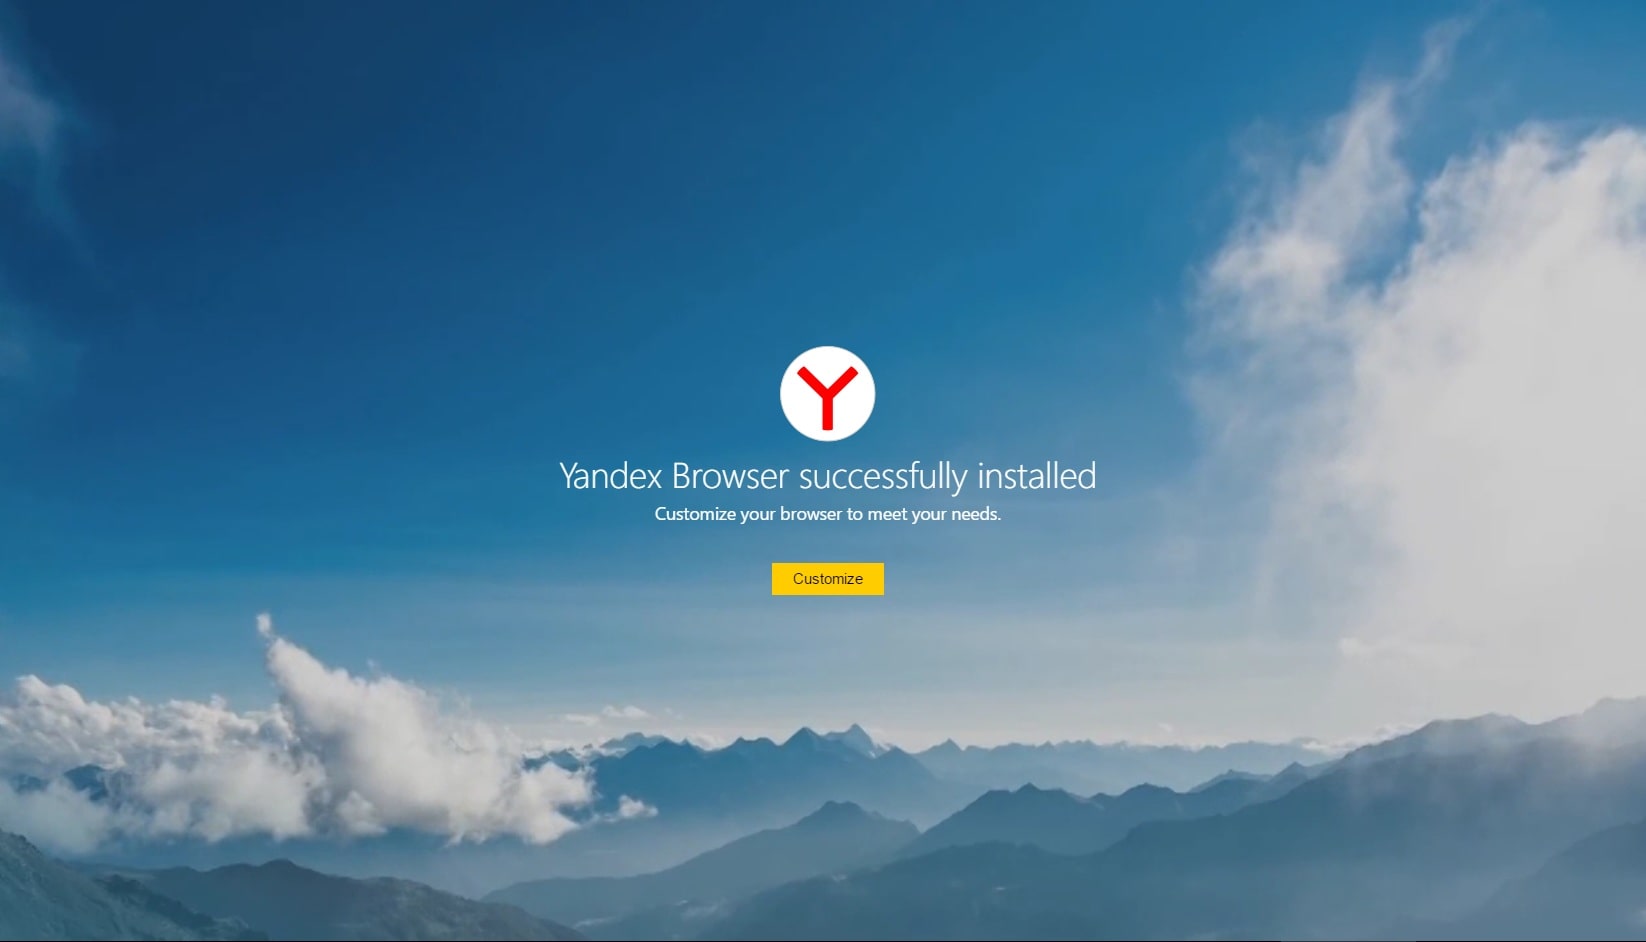 Having a dedicated browser called Yandex